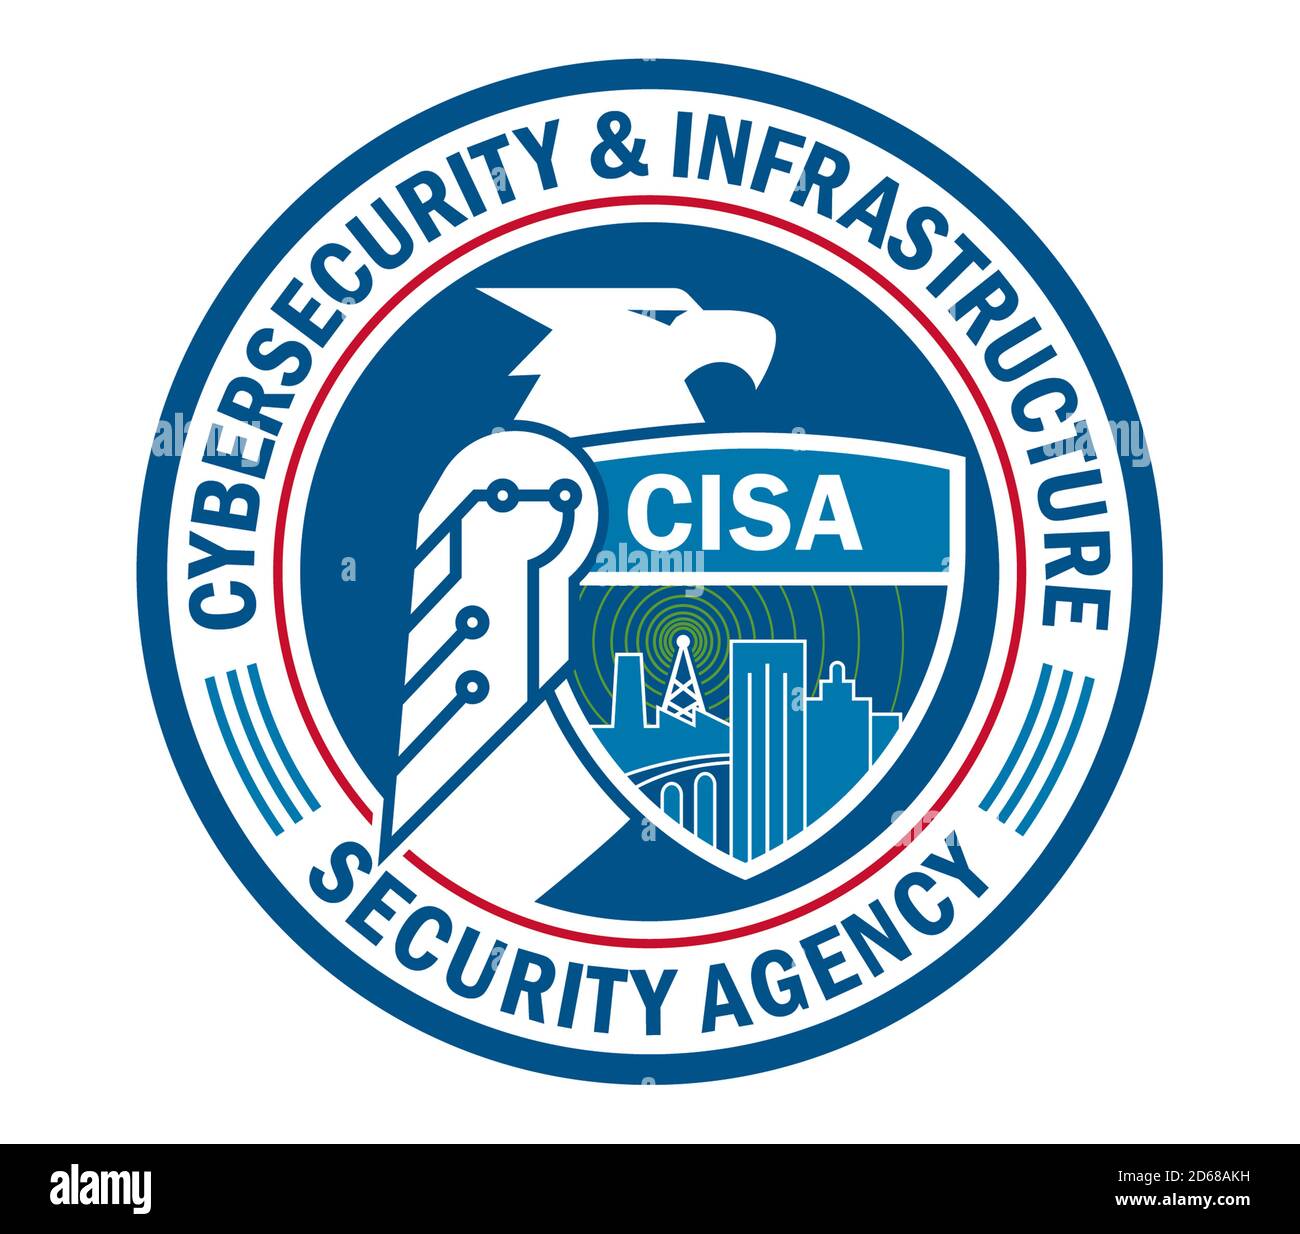 Cybersecurity and Infrastructure Security Agency Stock Photo